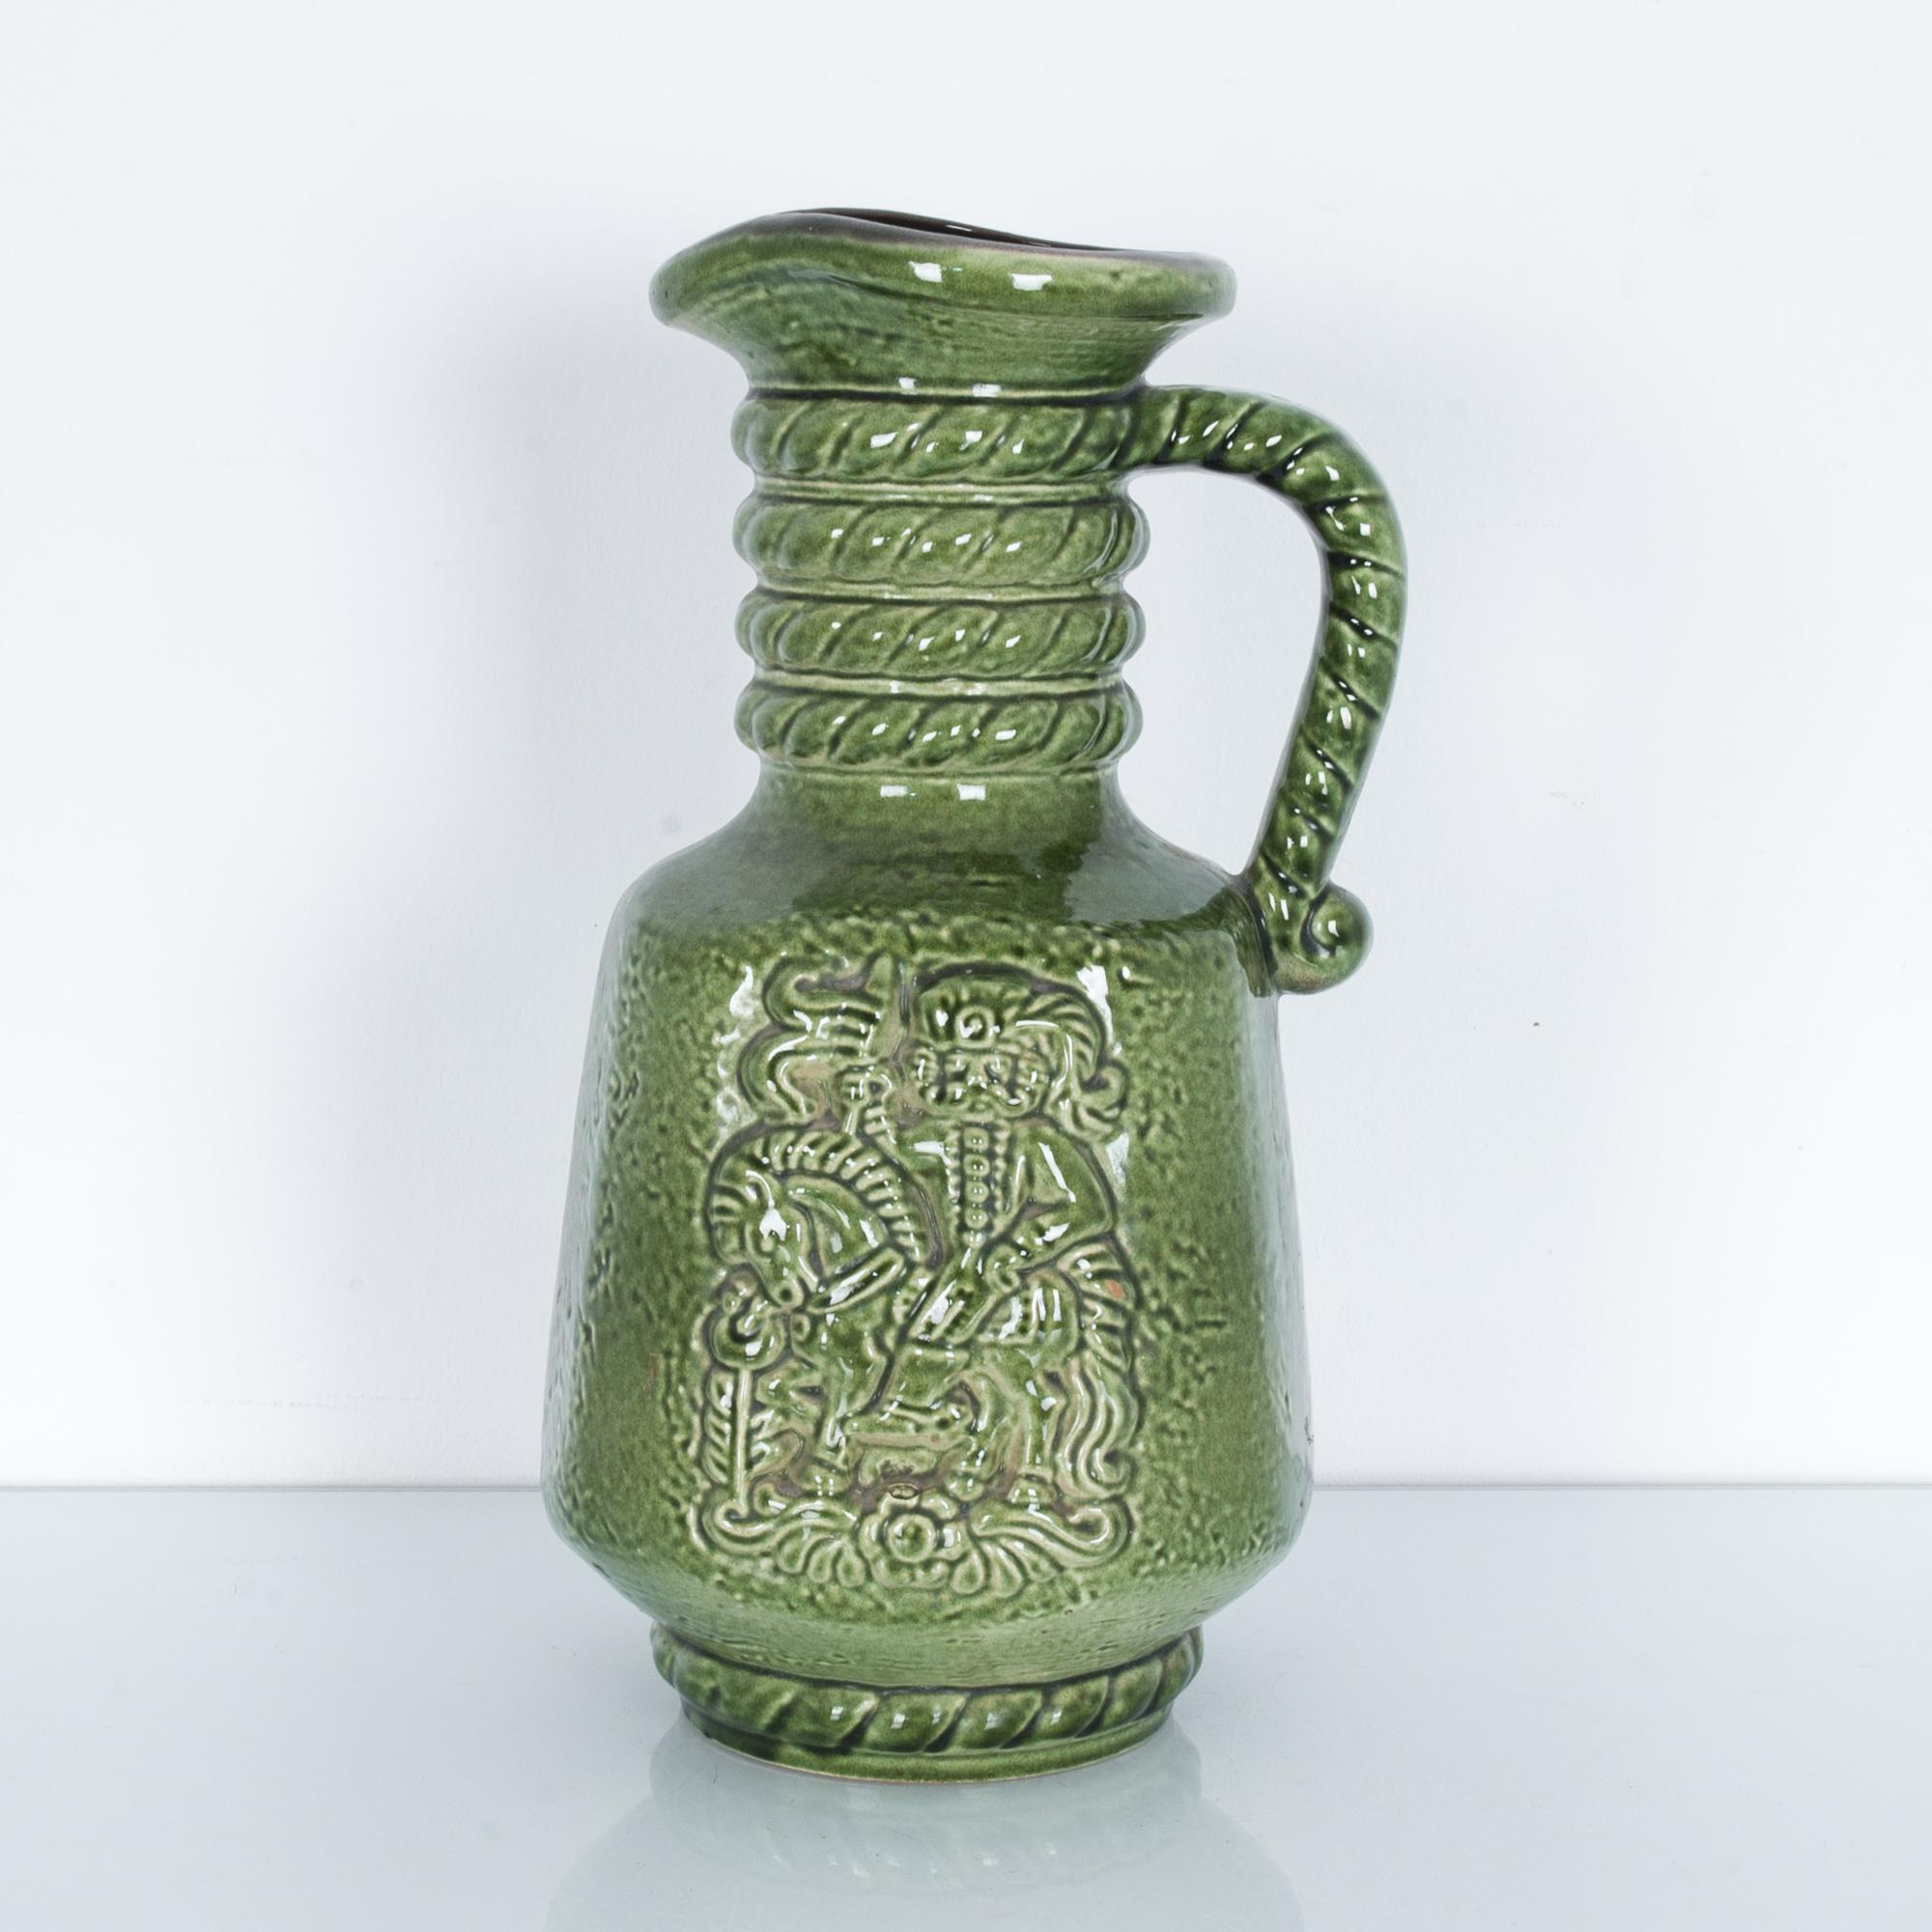 A graphic patterned vase produced by Carstens in Germany, circa 1950, adorned with a playful figure, and glazed in green, stamped on bottom with production series and “W. GERMANY” mark. These characteristic mid-20th century ceramics were produced in